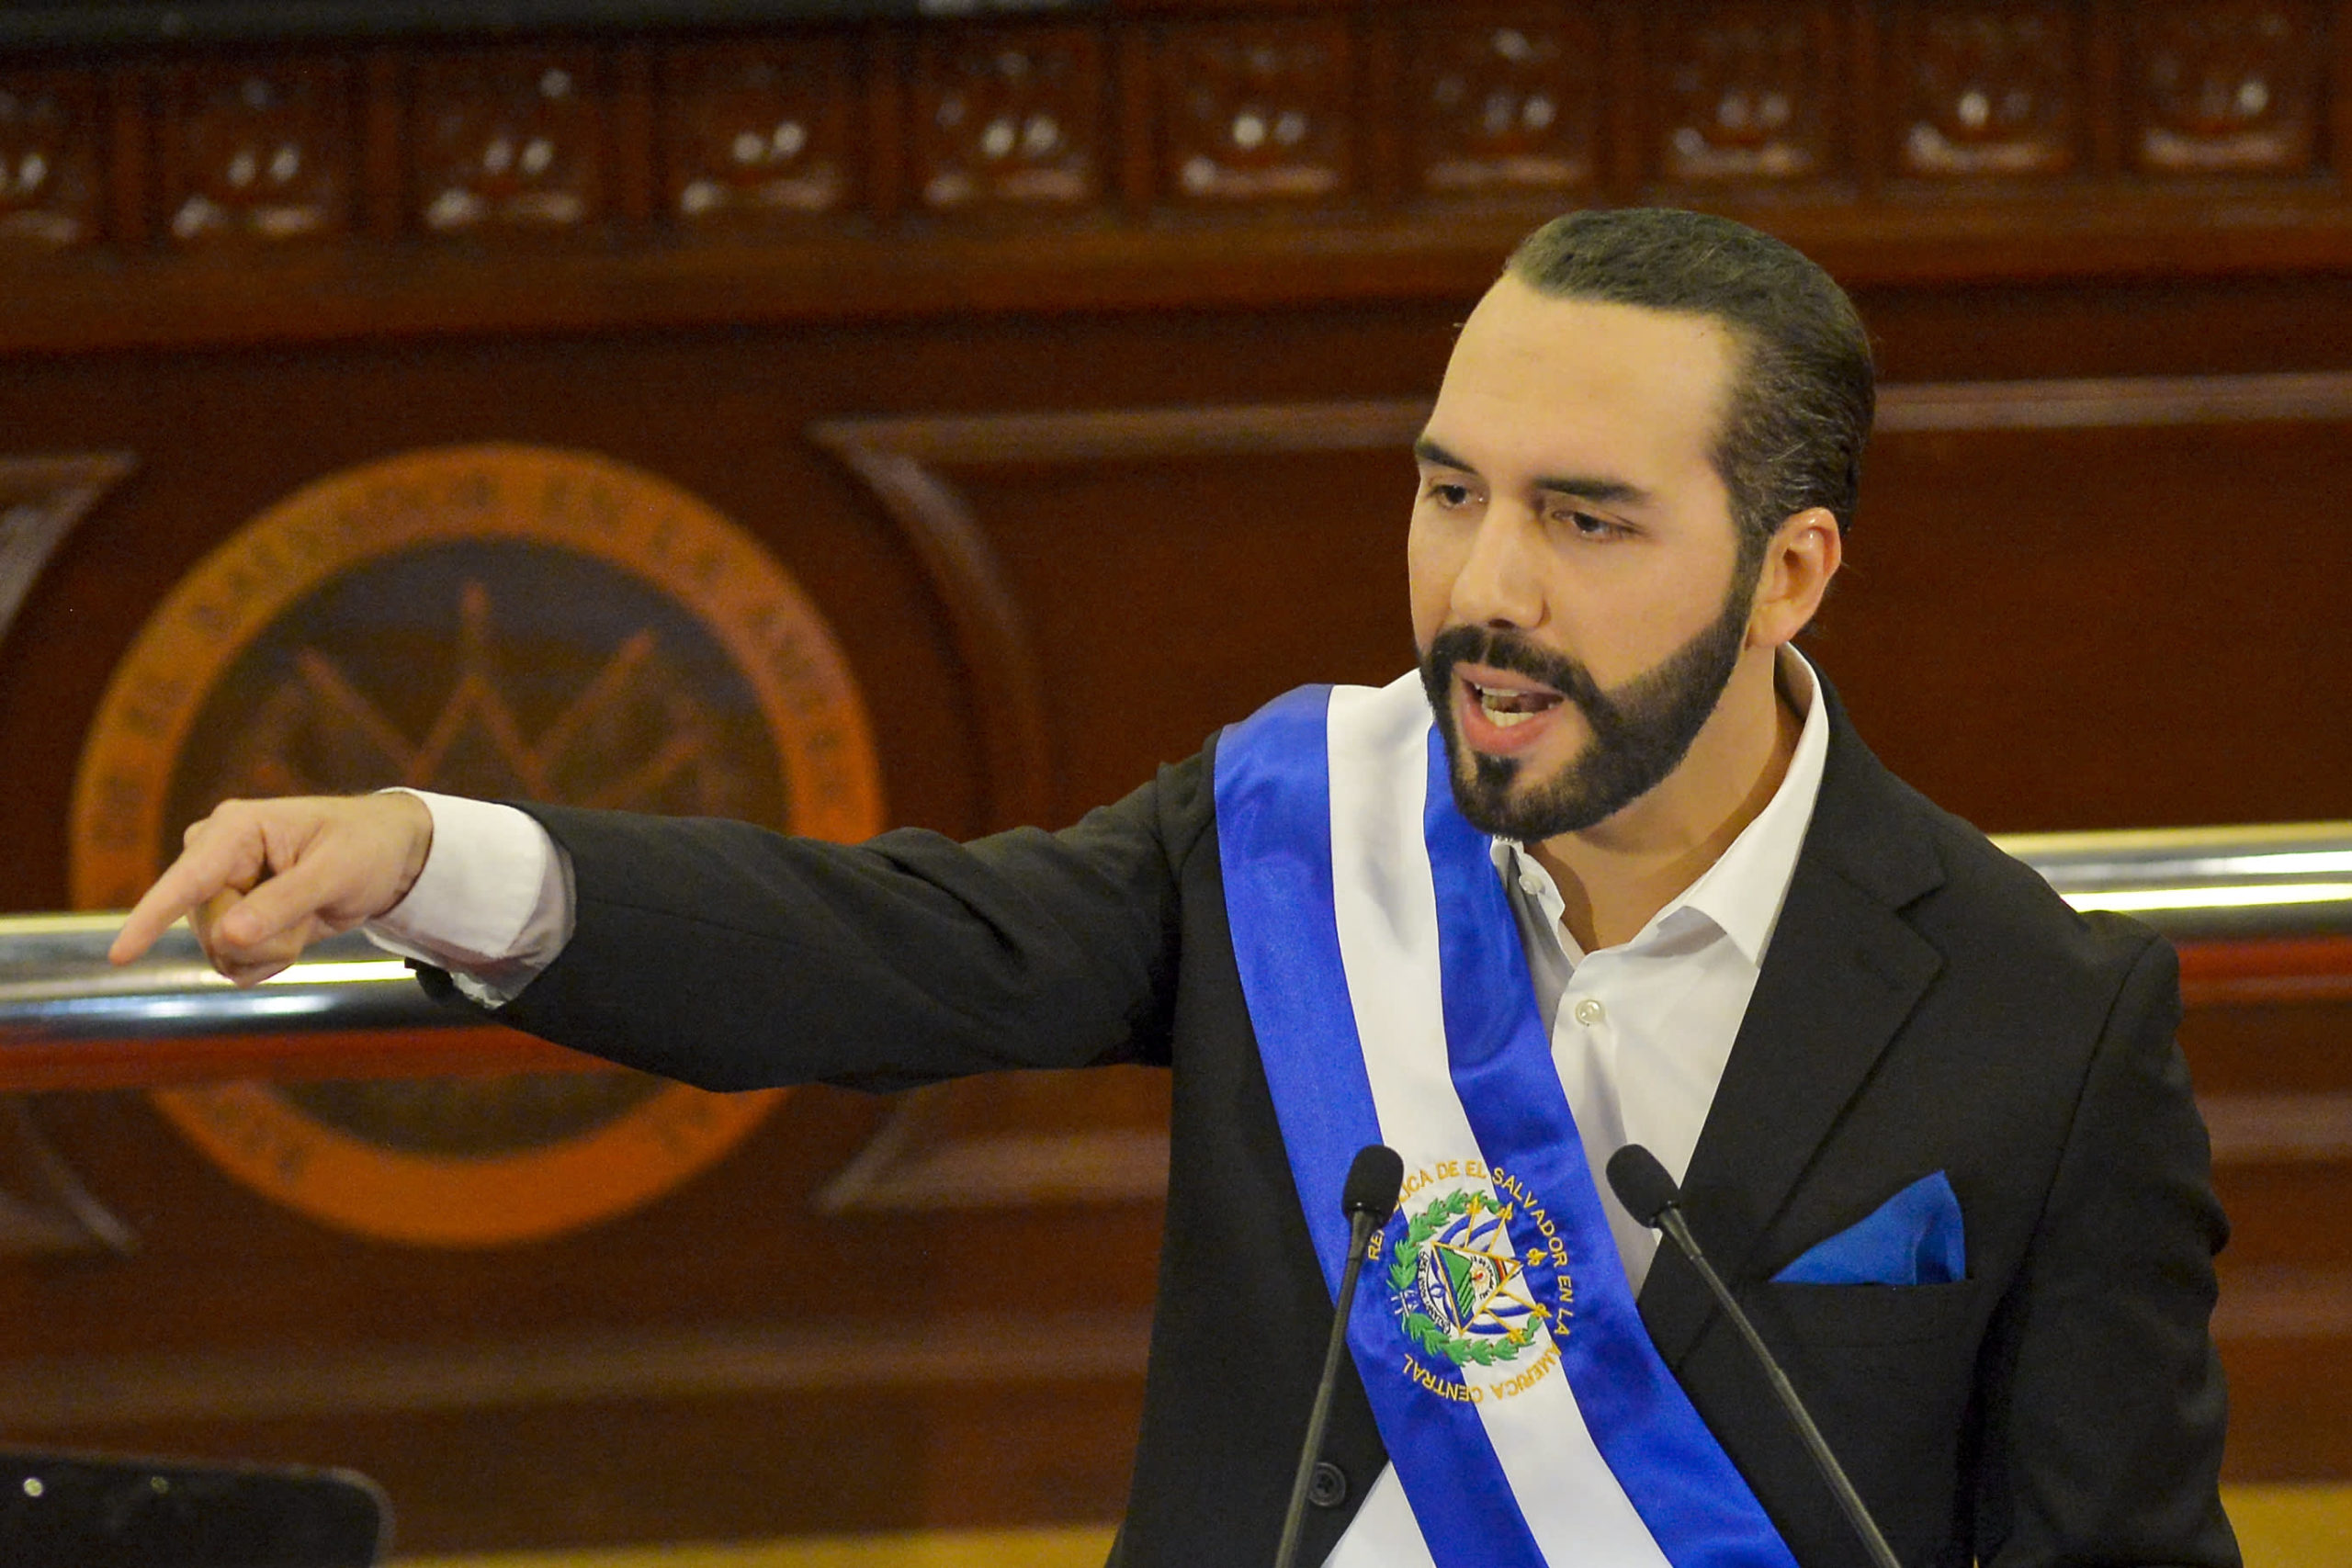 El Salvador is expected to be the first country to adopt Bitcoin as fiat currency